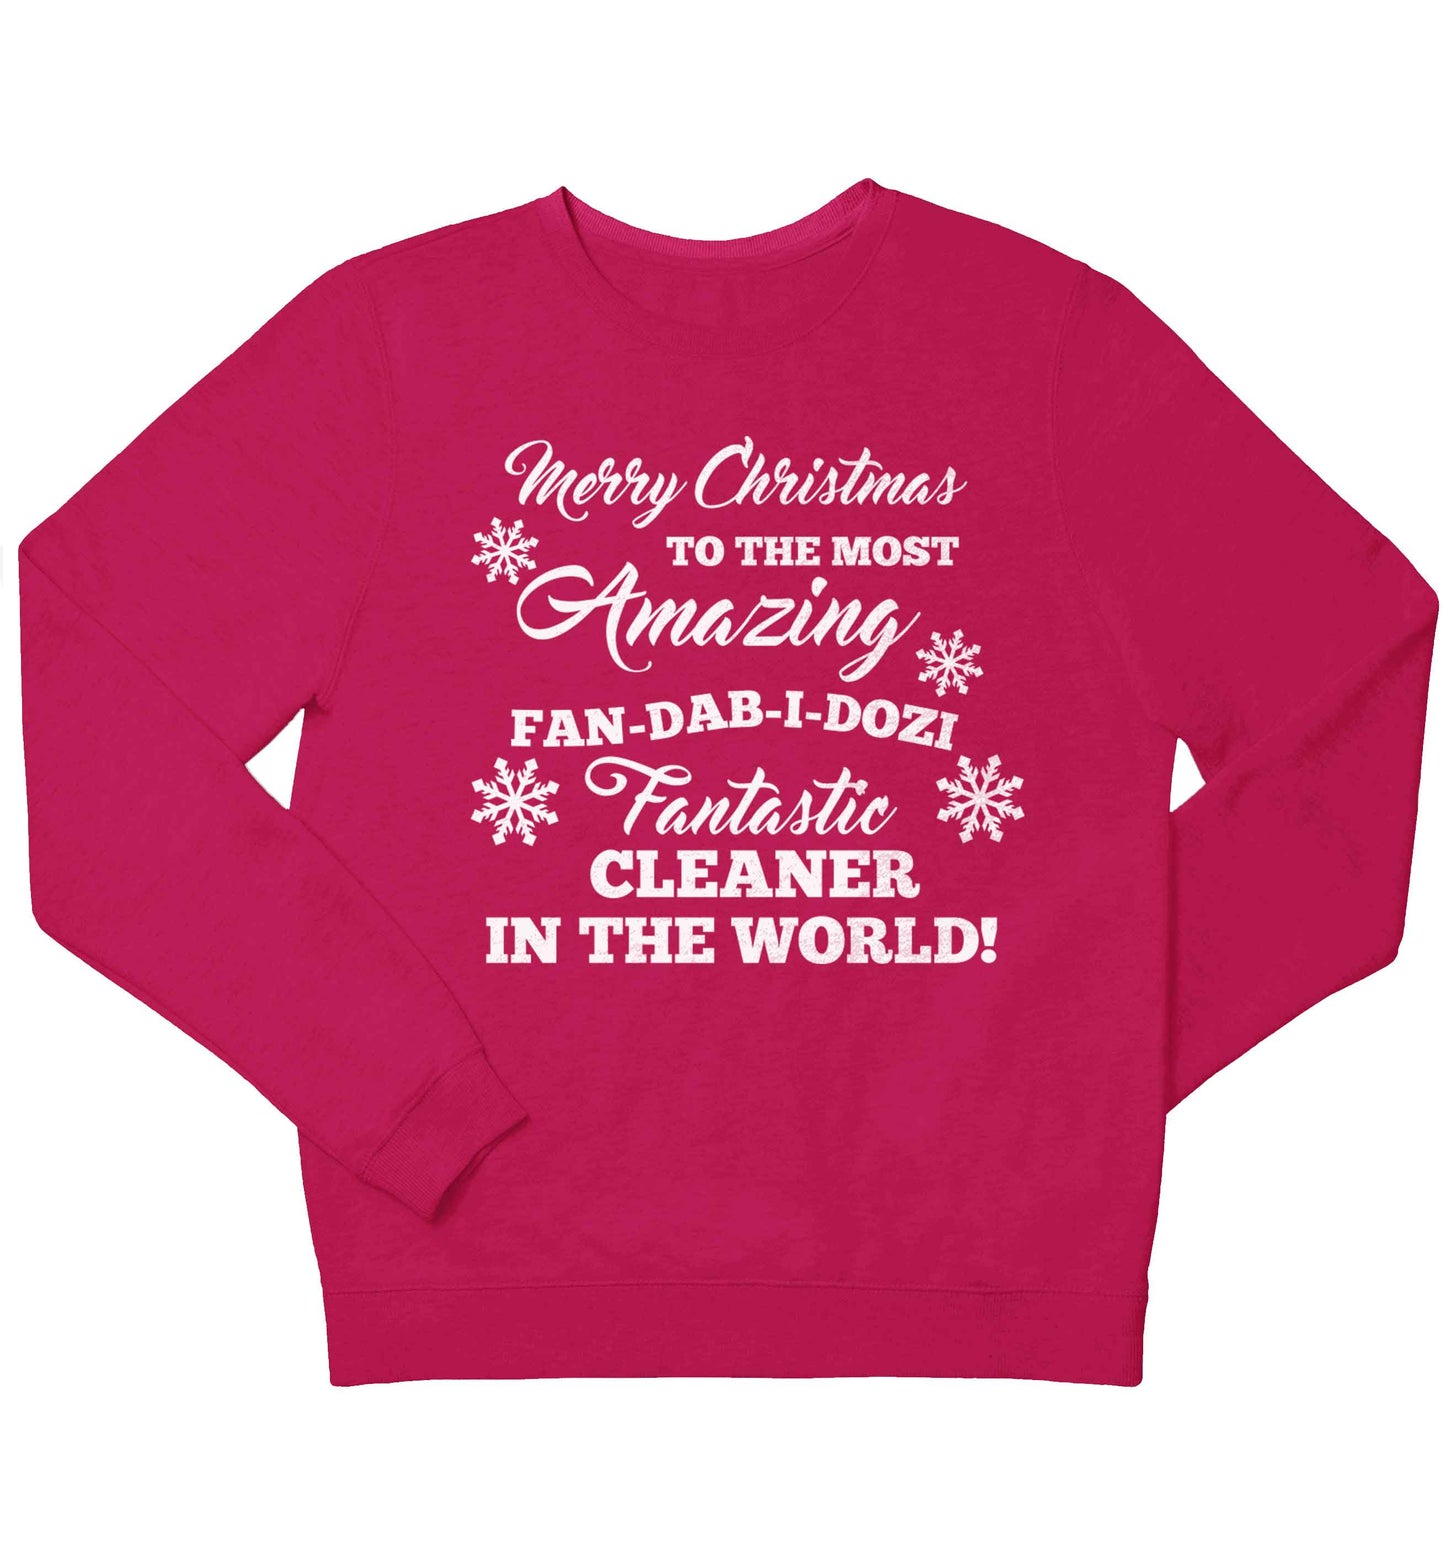 Merry Christmas to the most amazing fan-dab-i-dozi fantasic cleaner in the world children's pink sweater 12-13 Years